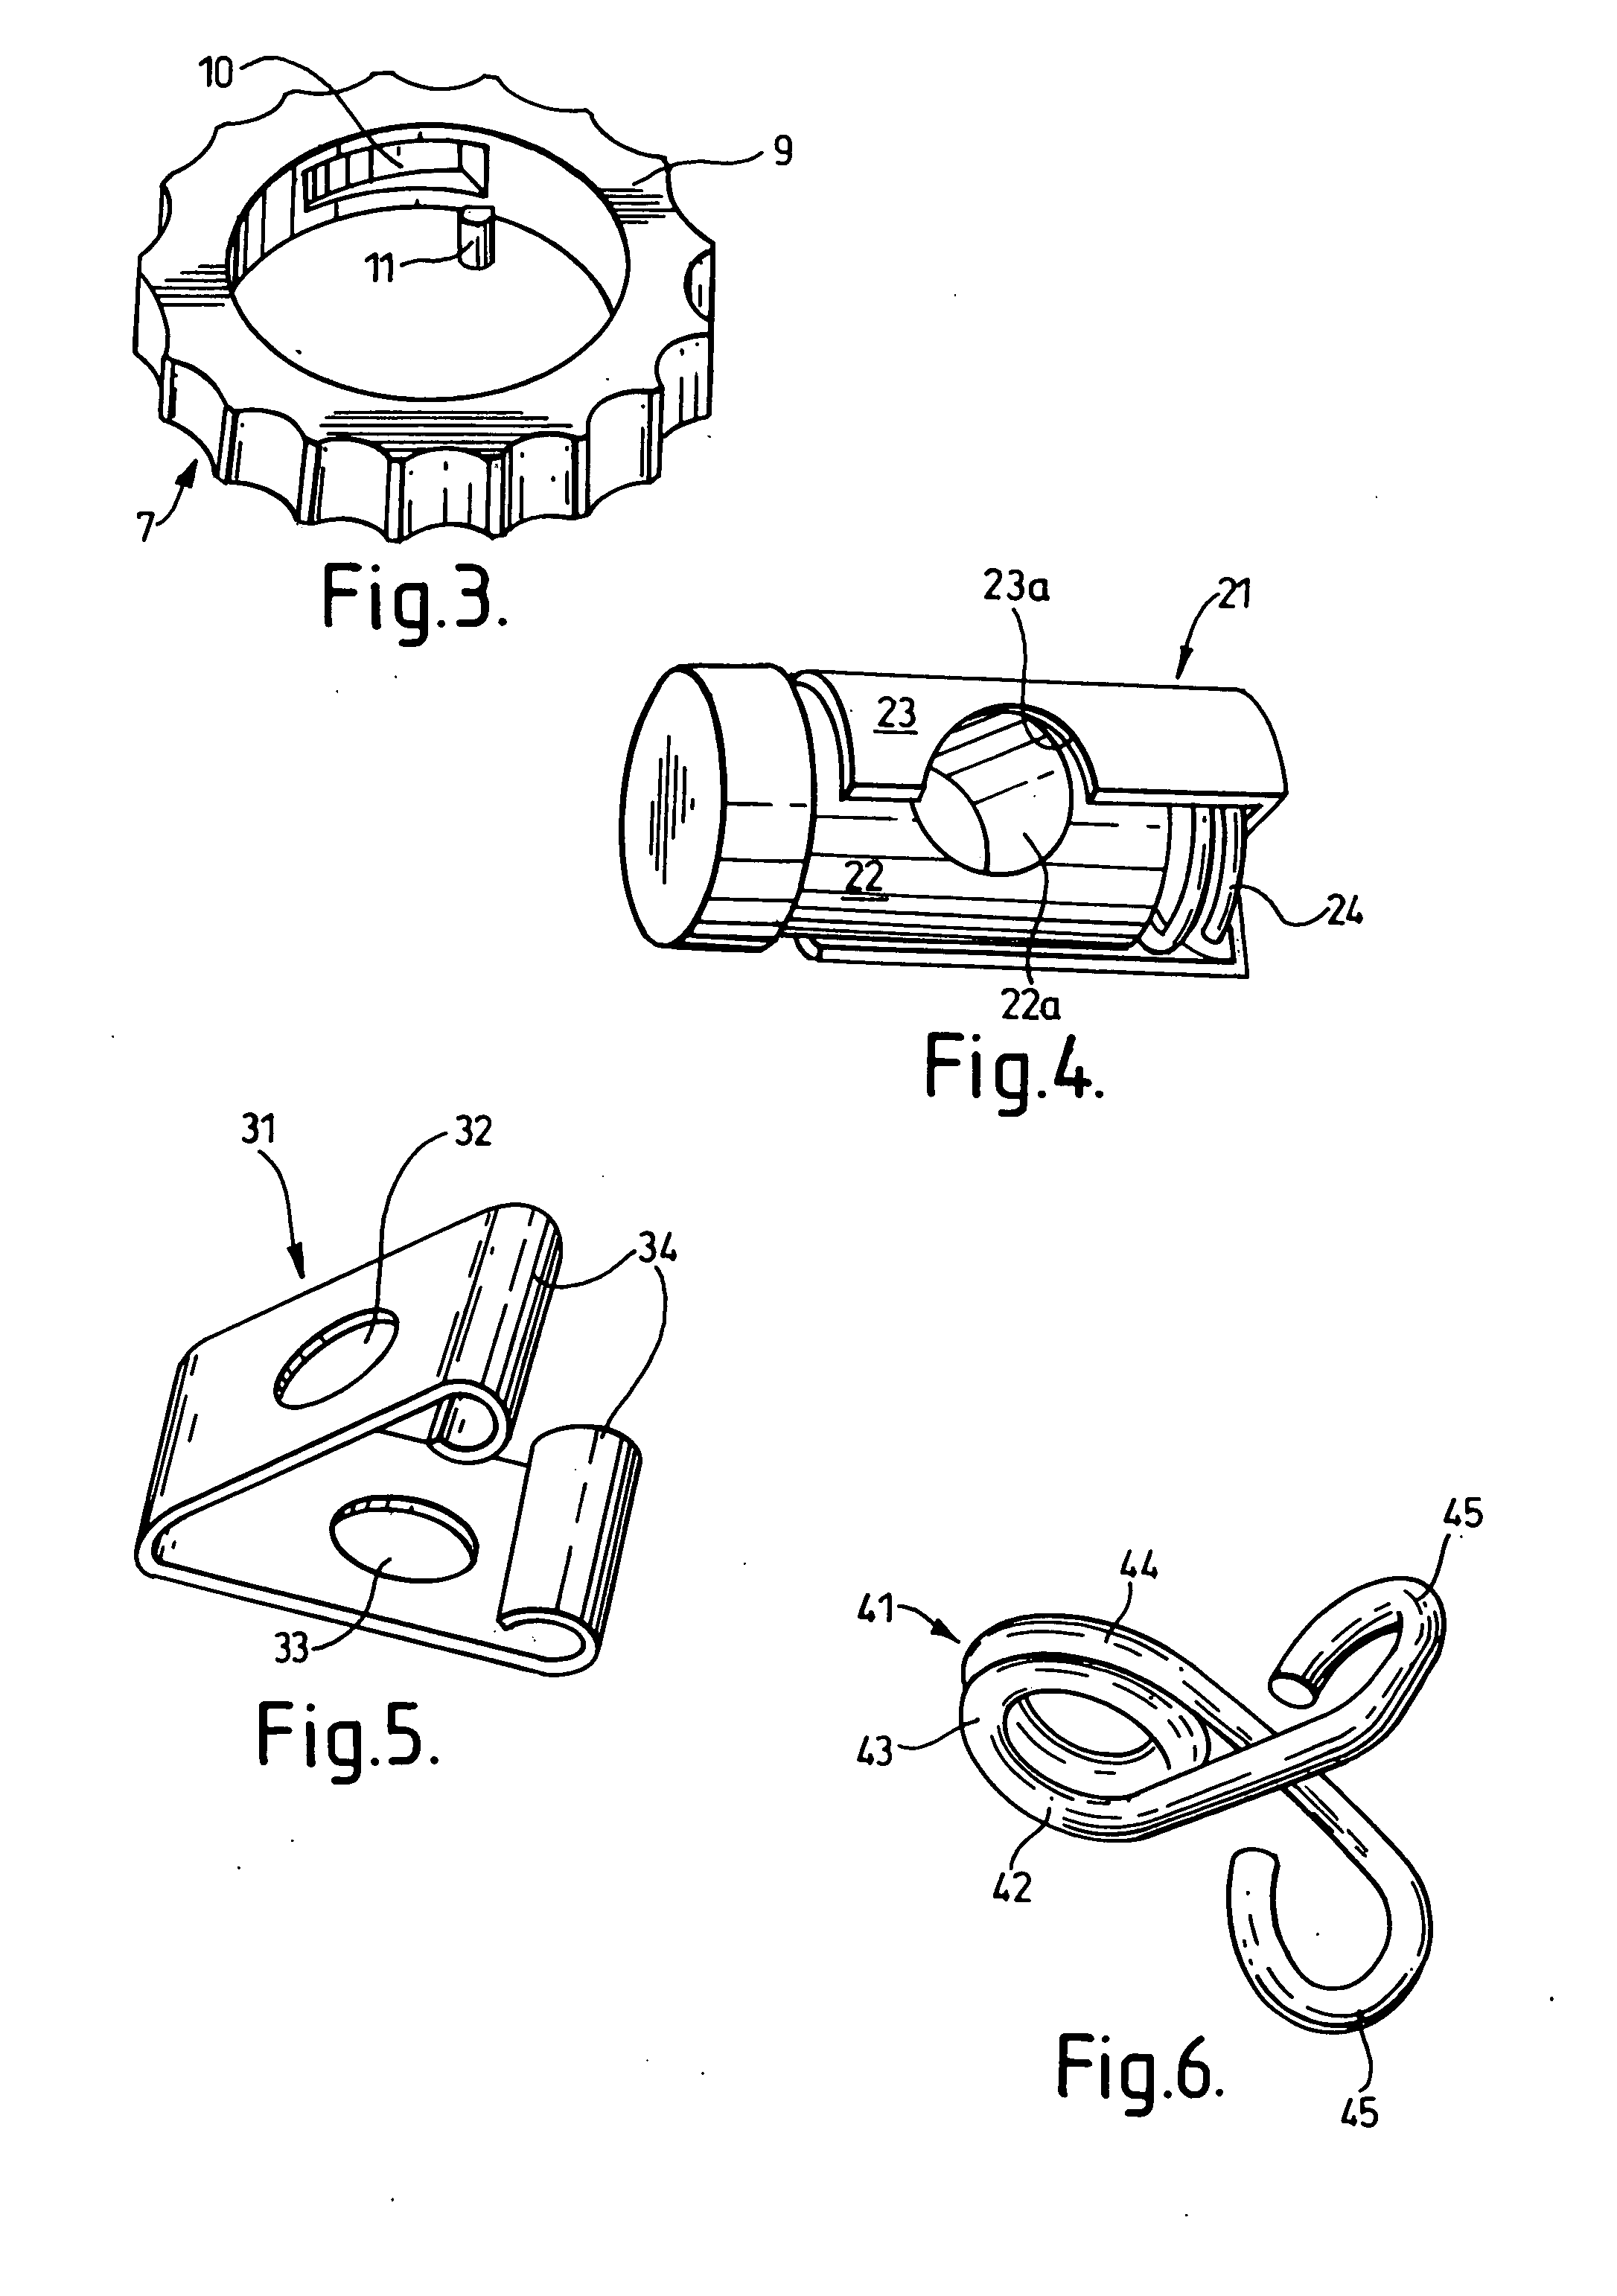 Tissue morcellating device